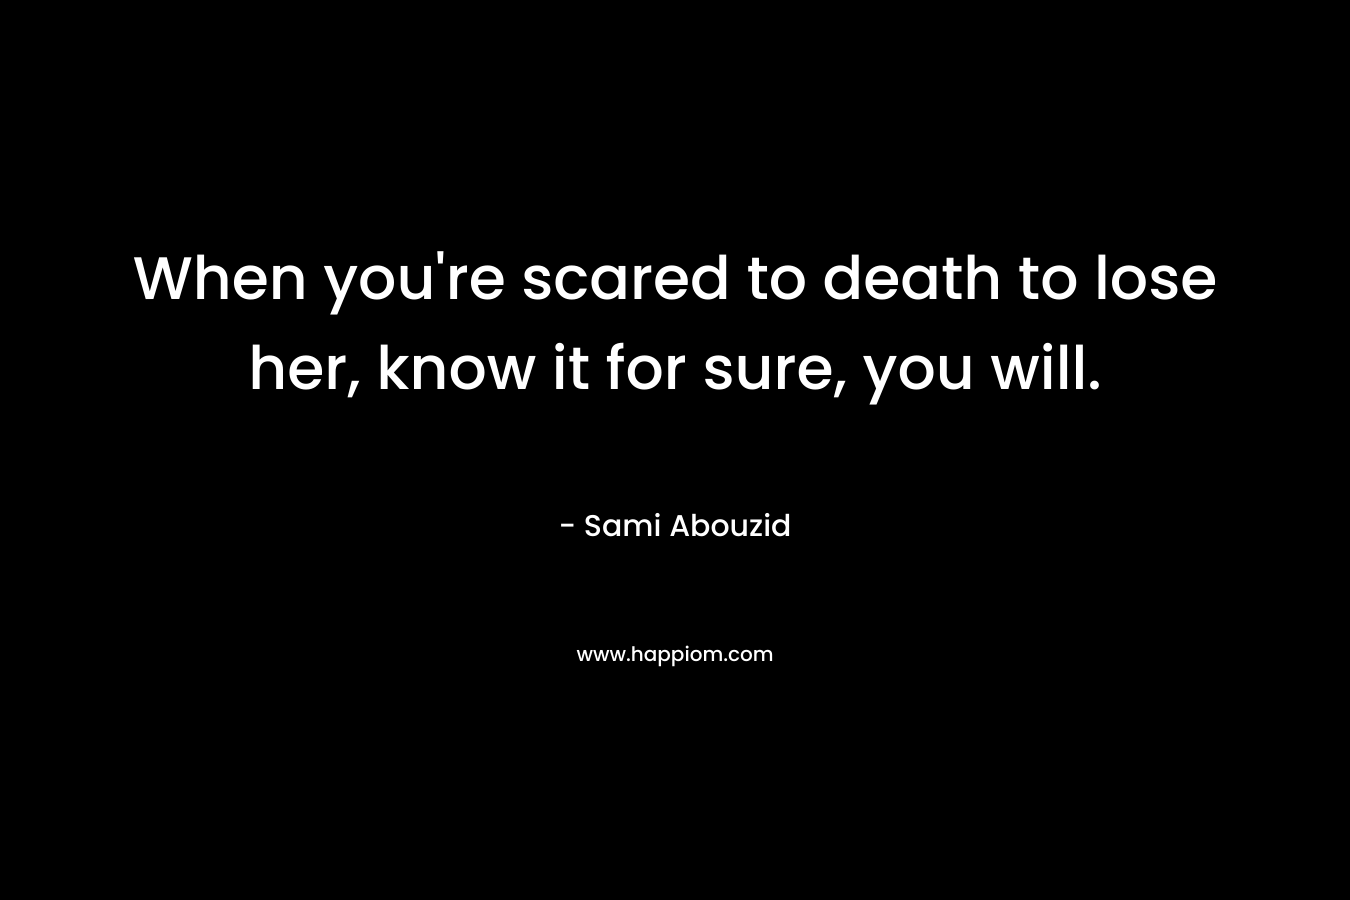 When you're scared to death to lose her, know it for sure, you will.